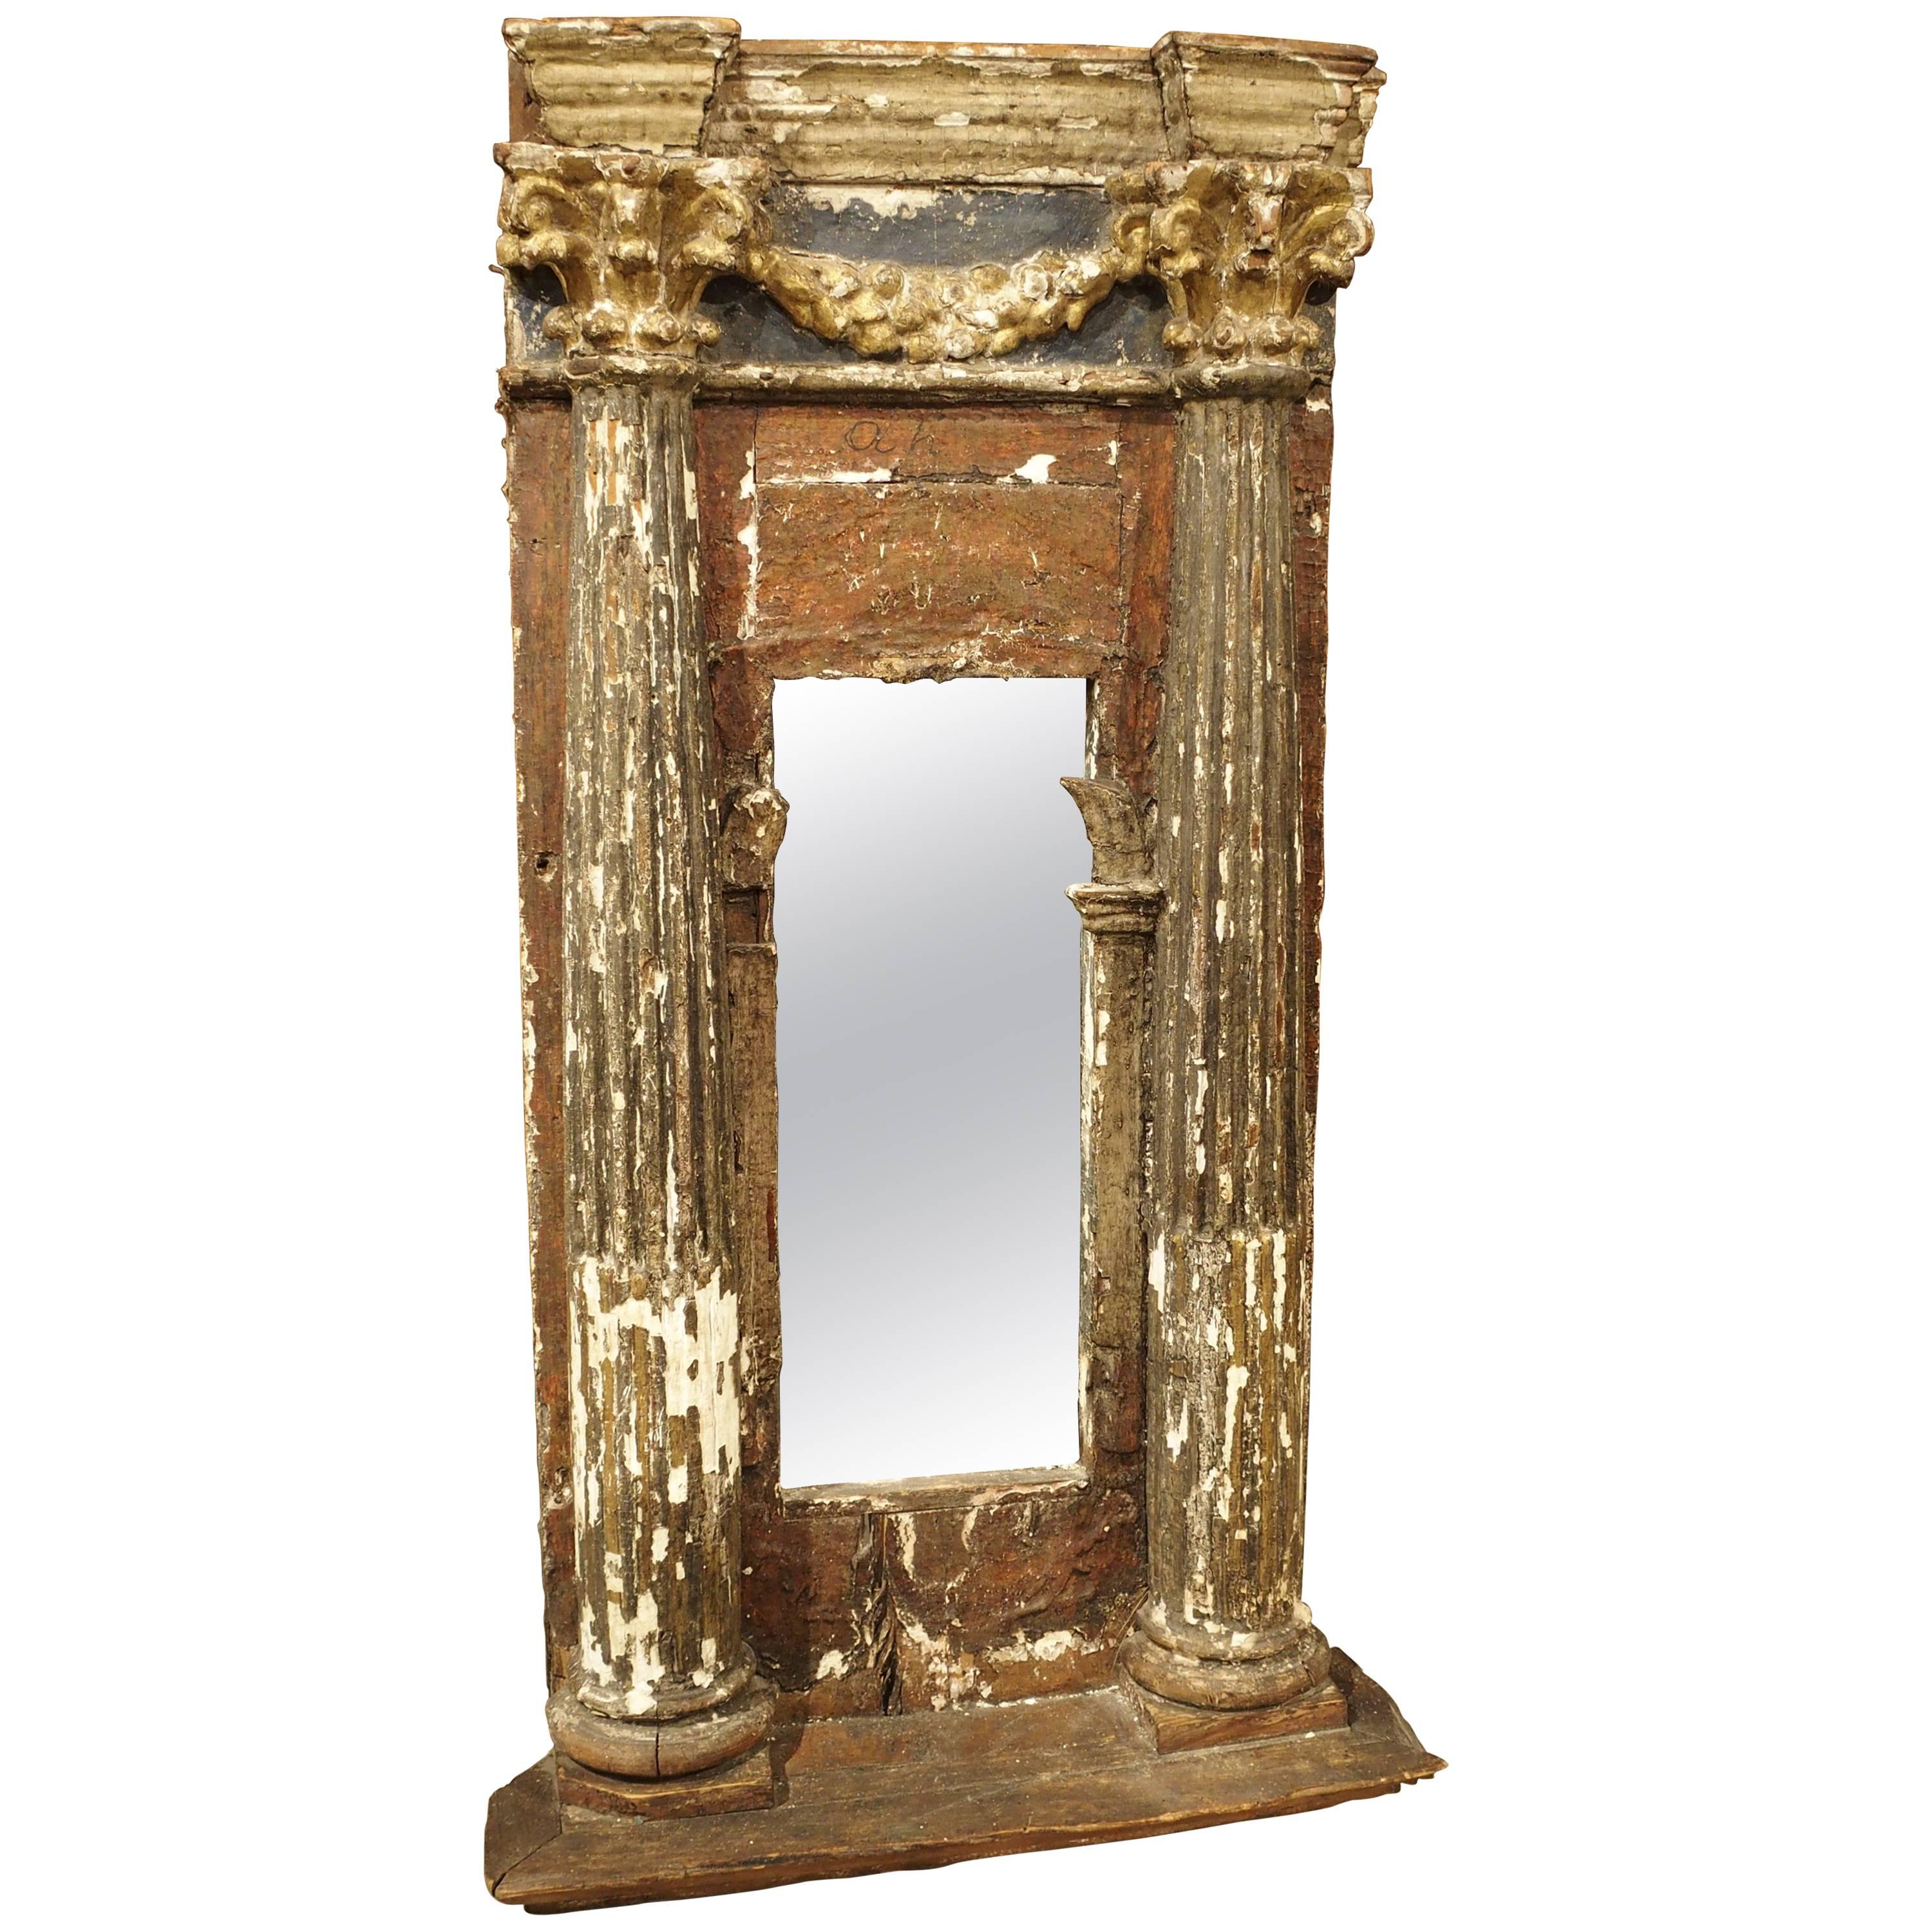 17th Century Tabernacle Mirror from Italy